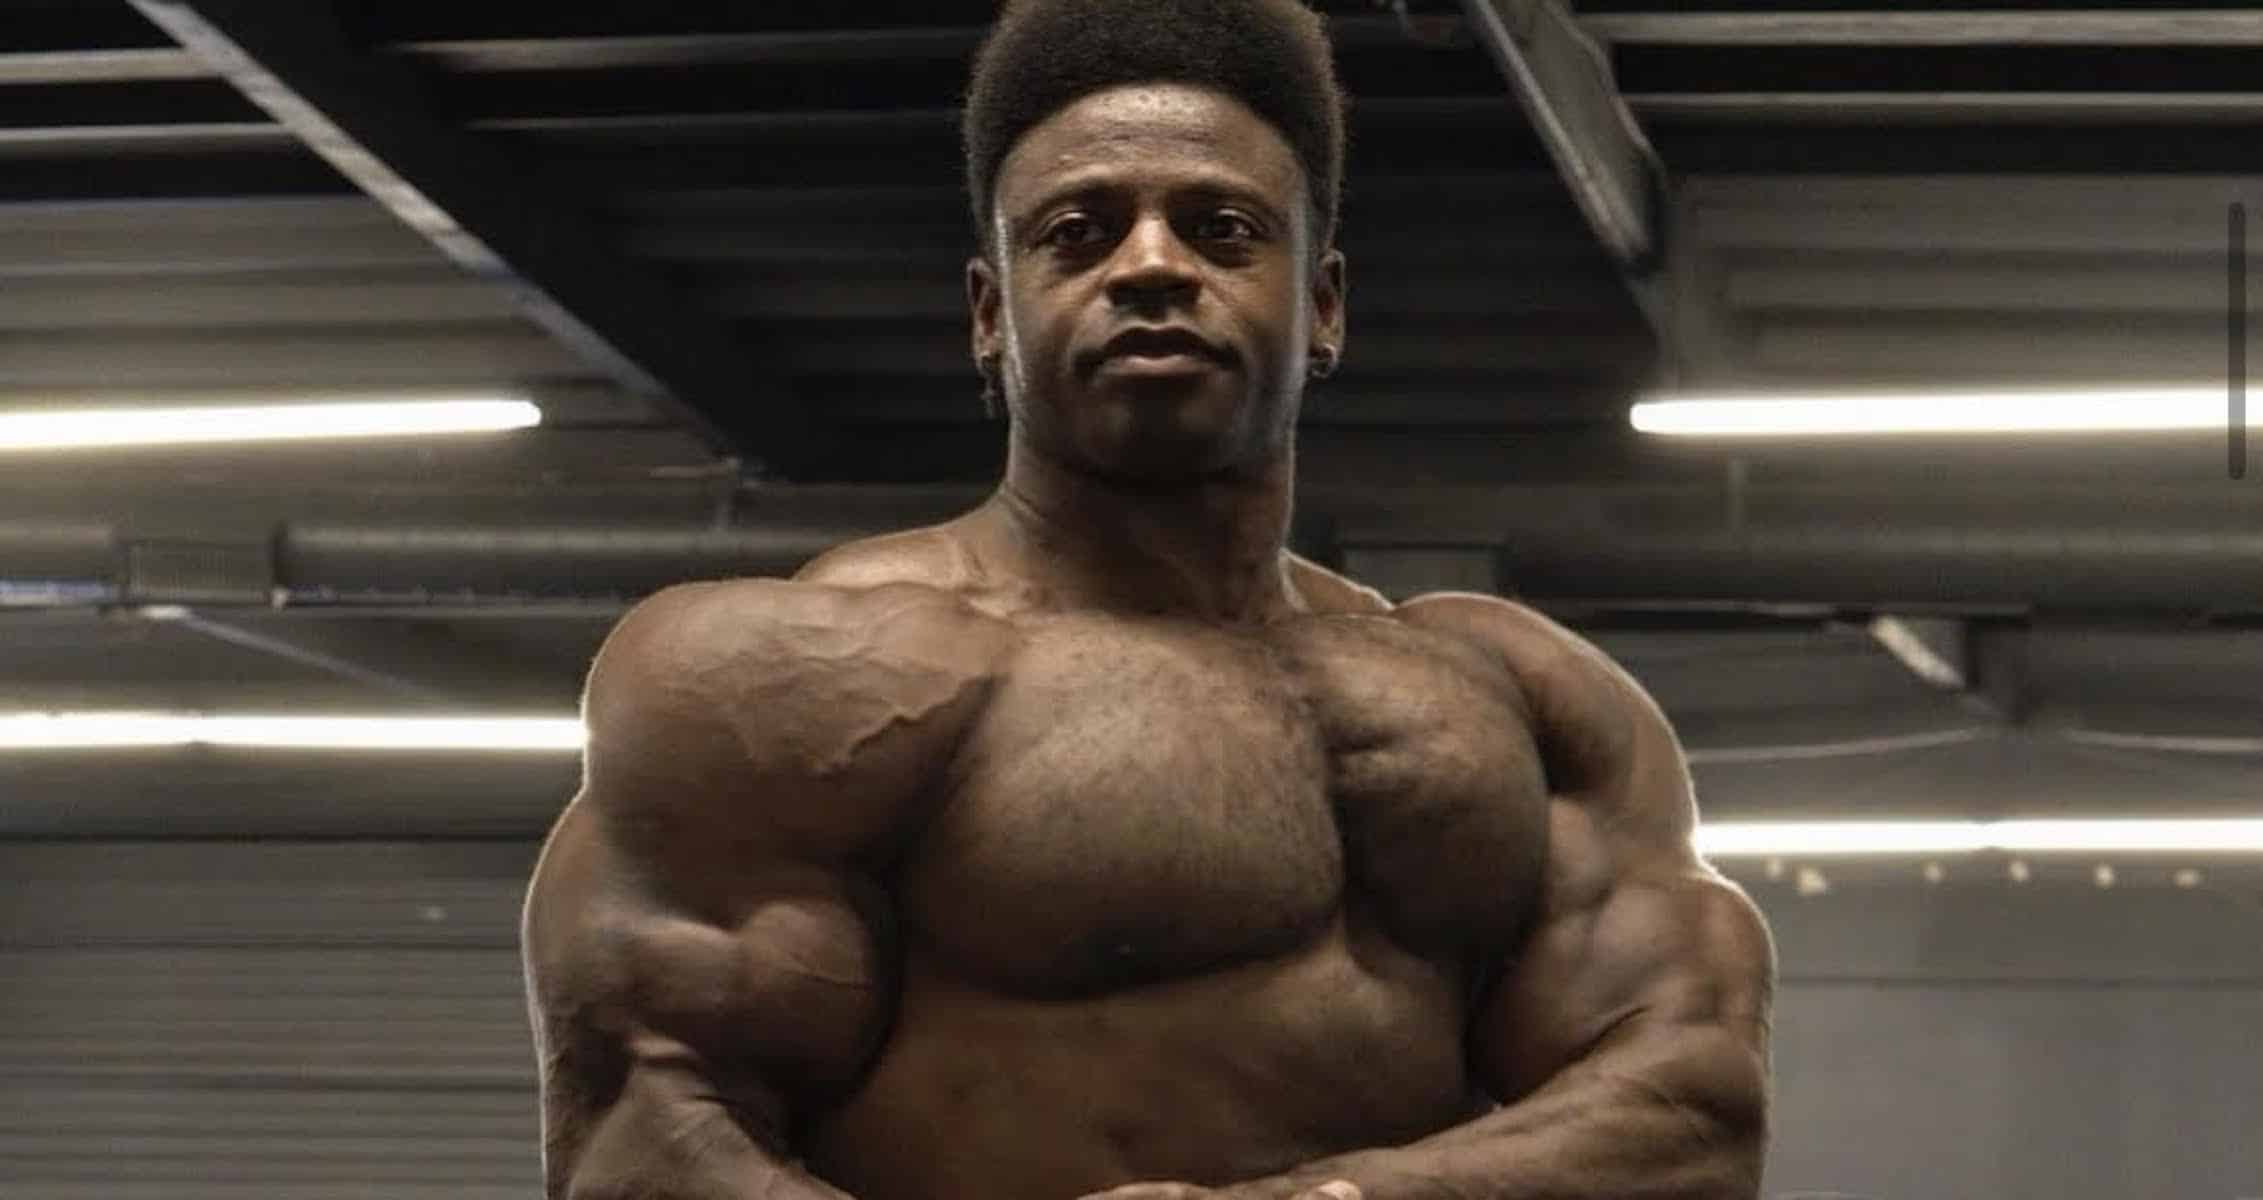 Breon Ansley To Bring His Biggest Biceps and Triceps at 2022 Olympia, Joins  Mike O'Hearn For an Arm Workout – Fitness Volt